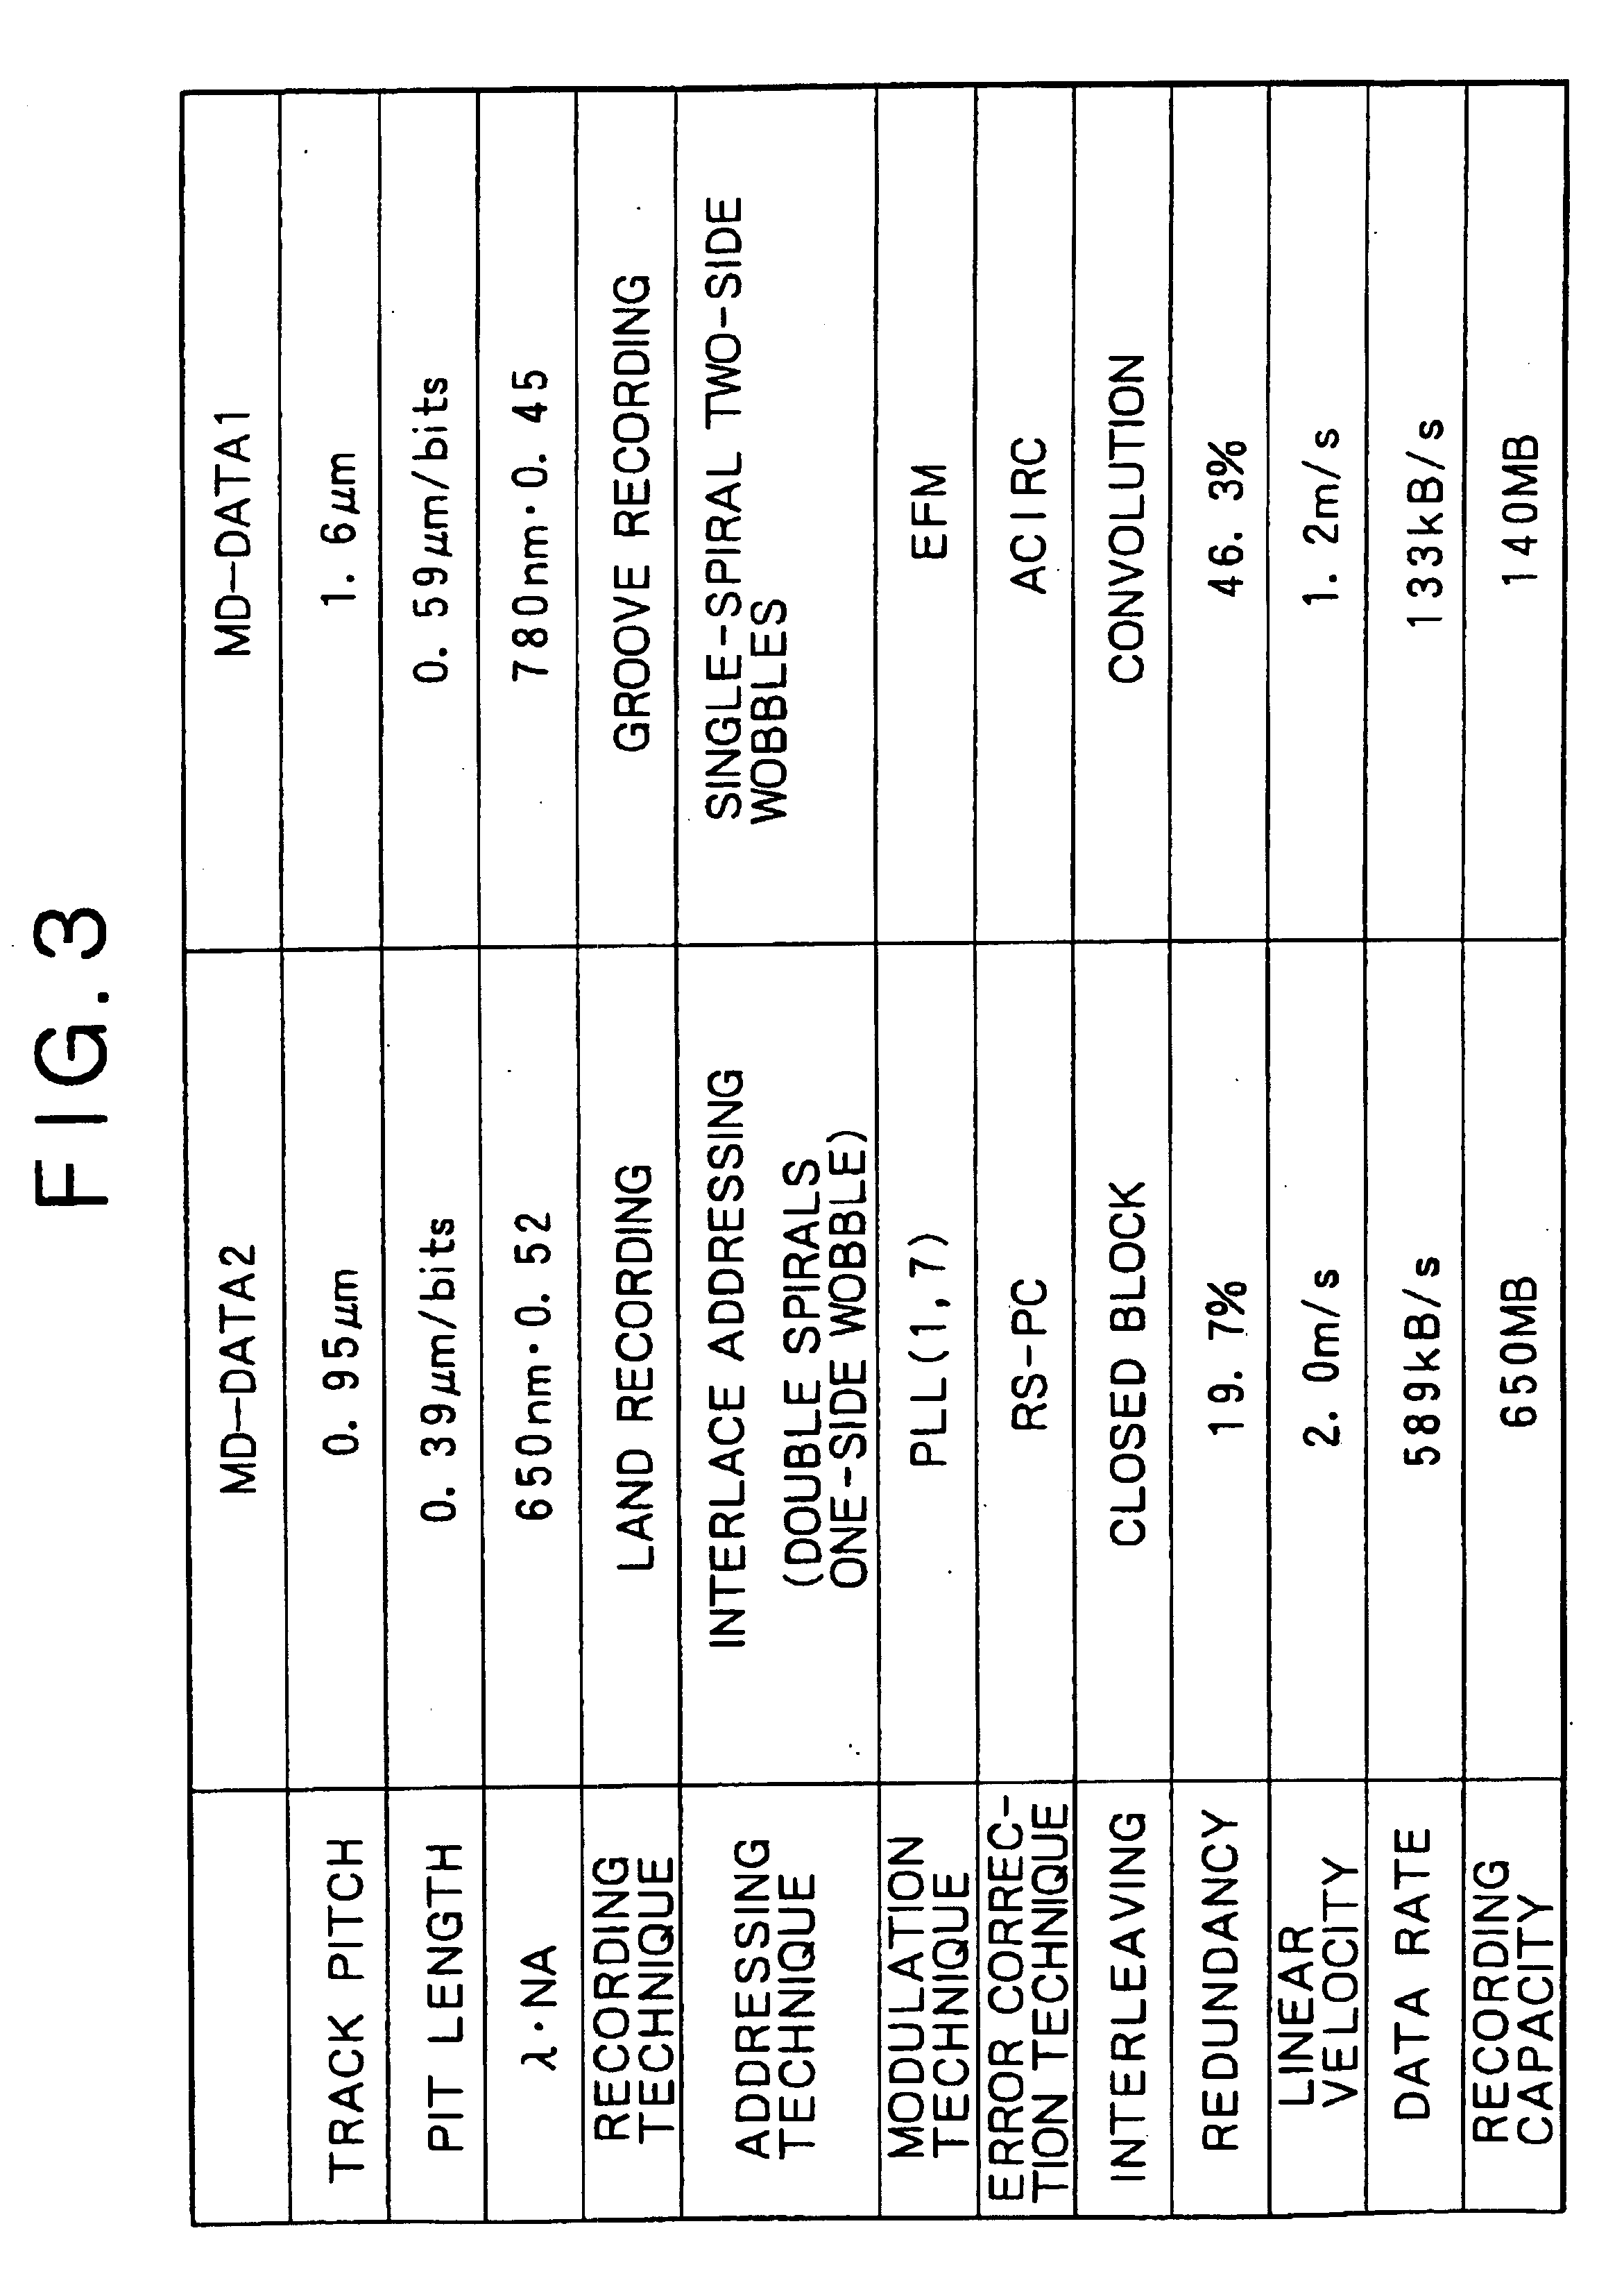 Recording/reproduction apparatus and group-based editing method